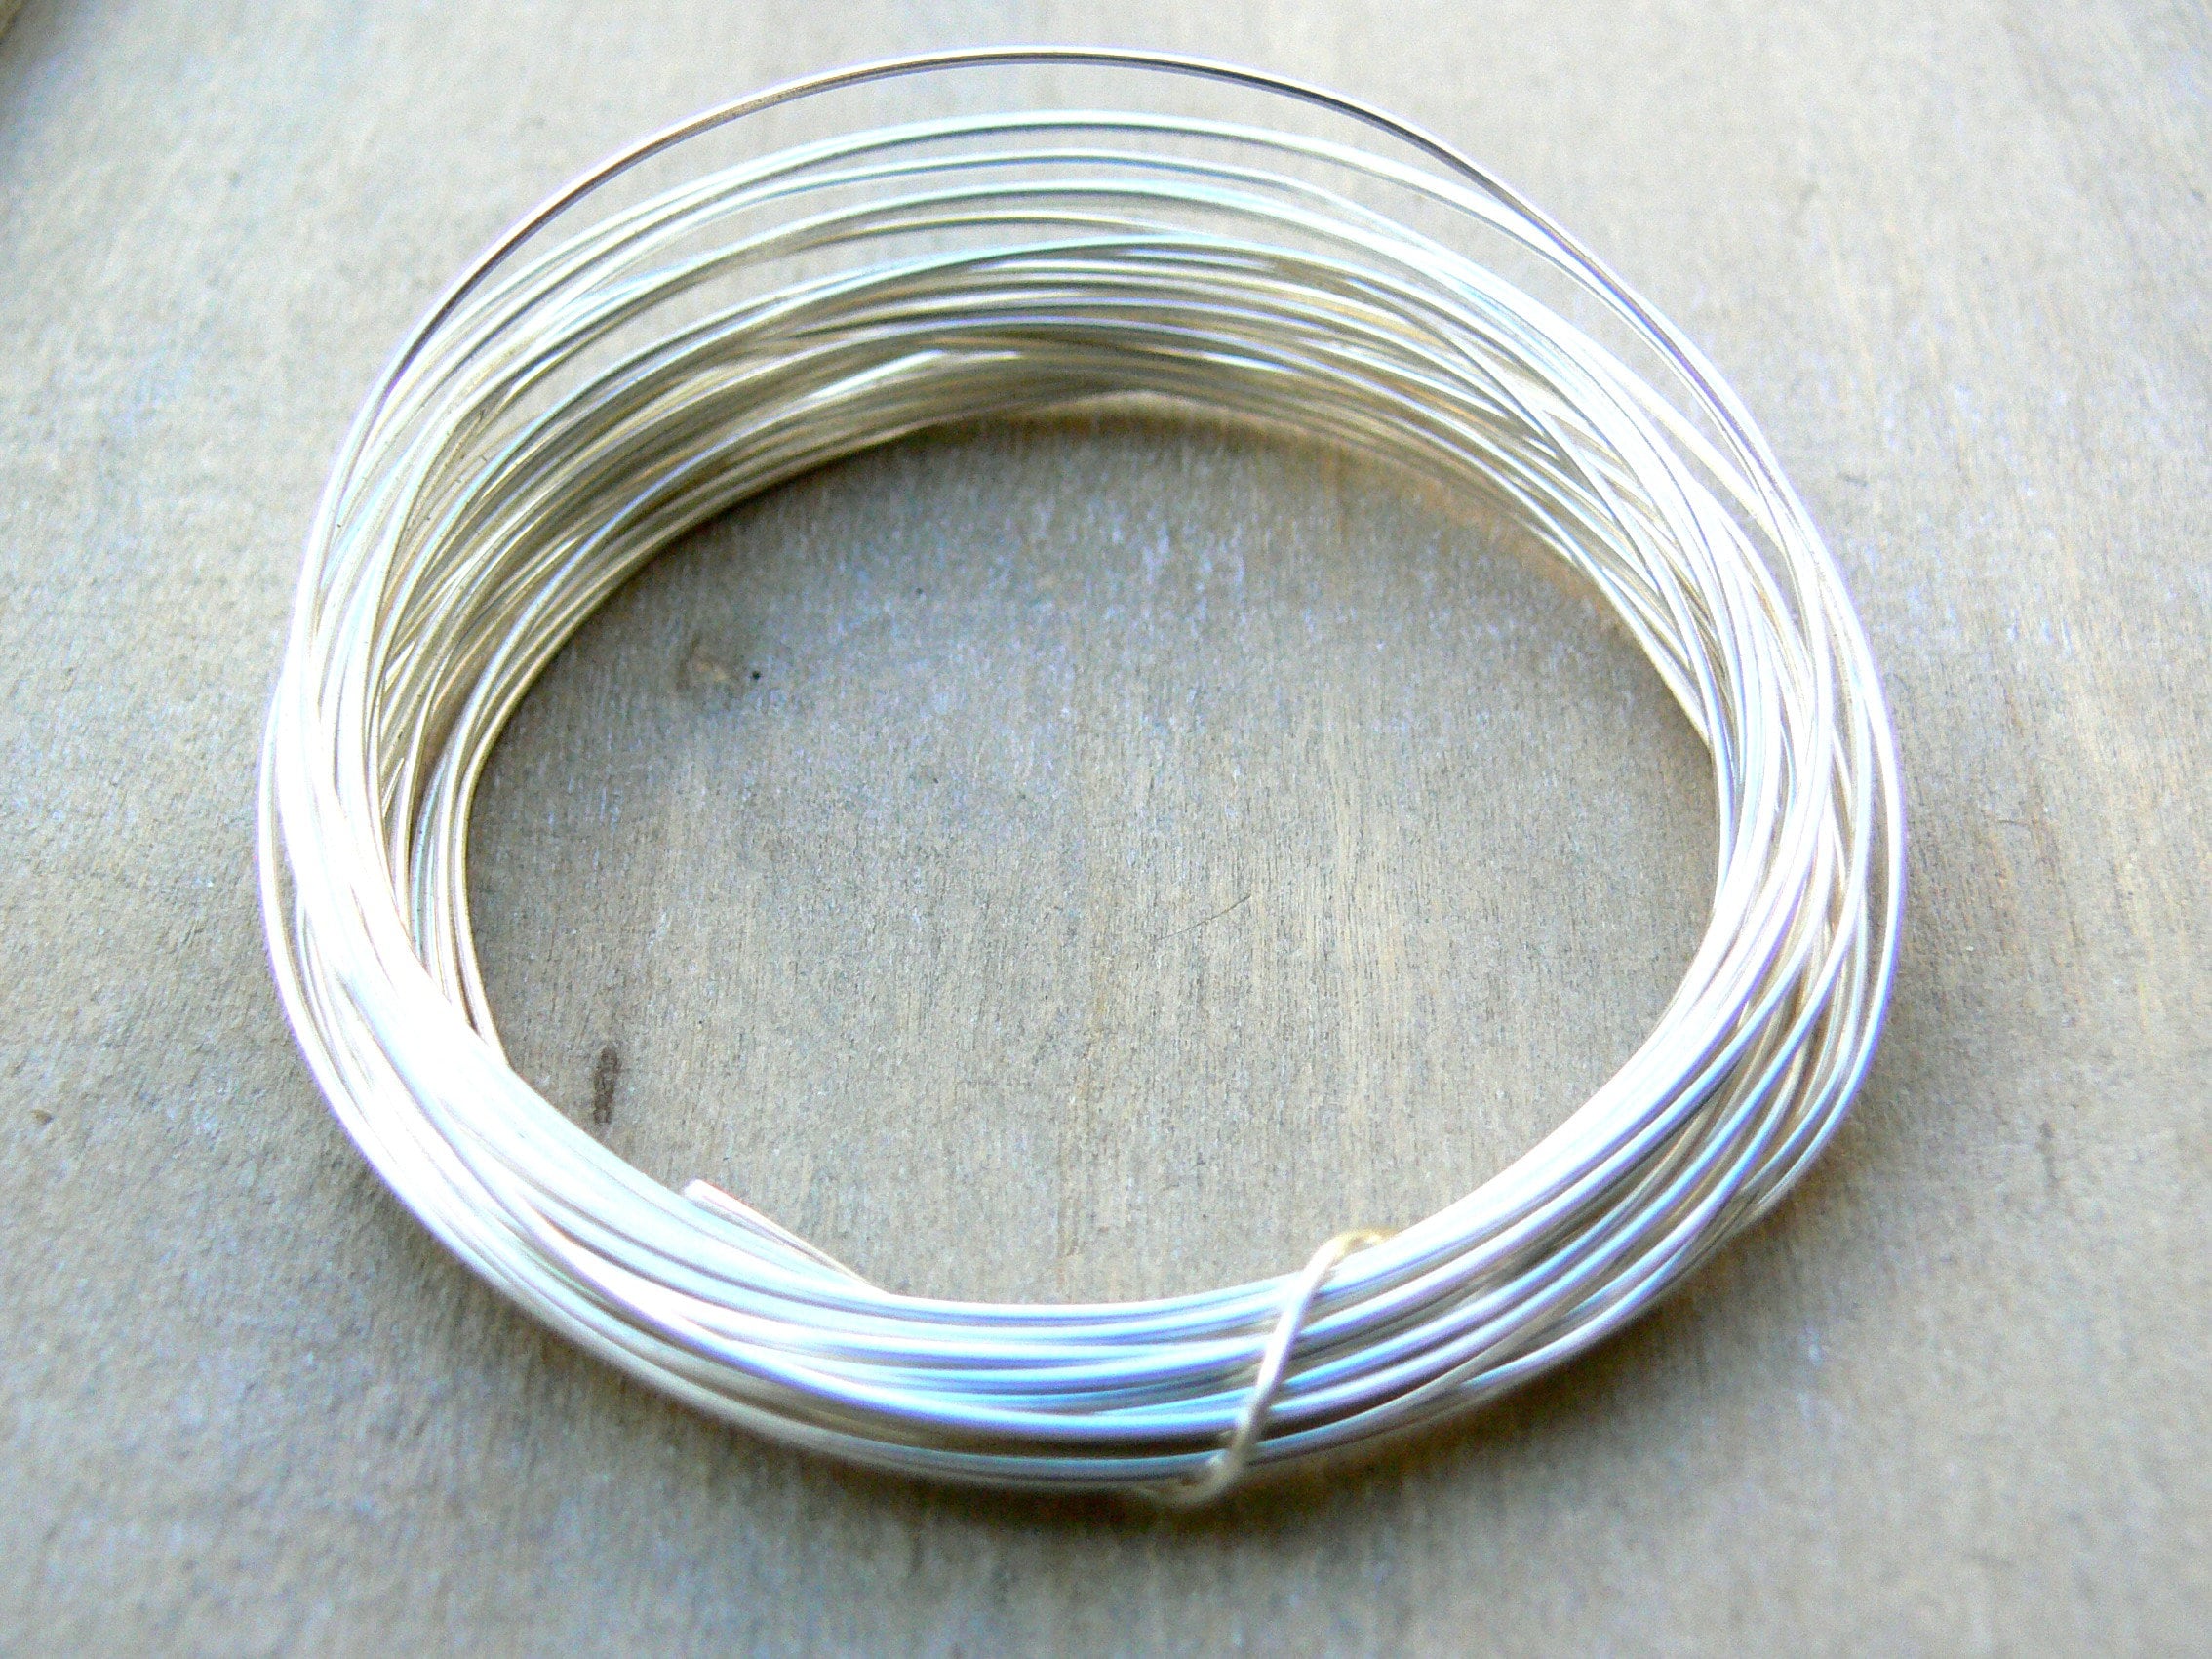 18 Gauge/1.0 mm, 5 FT Dead Soft 925 Sterling Silver Wire, Round Making  Jewelry Wire